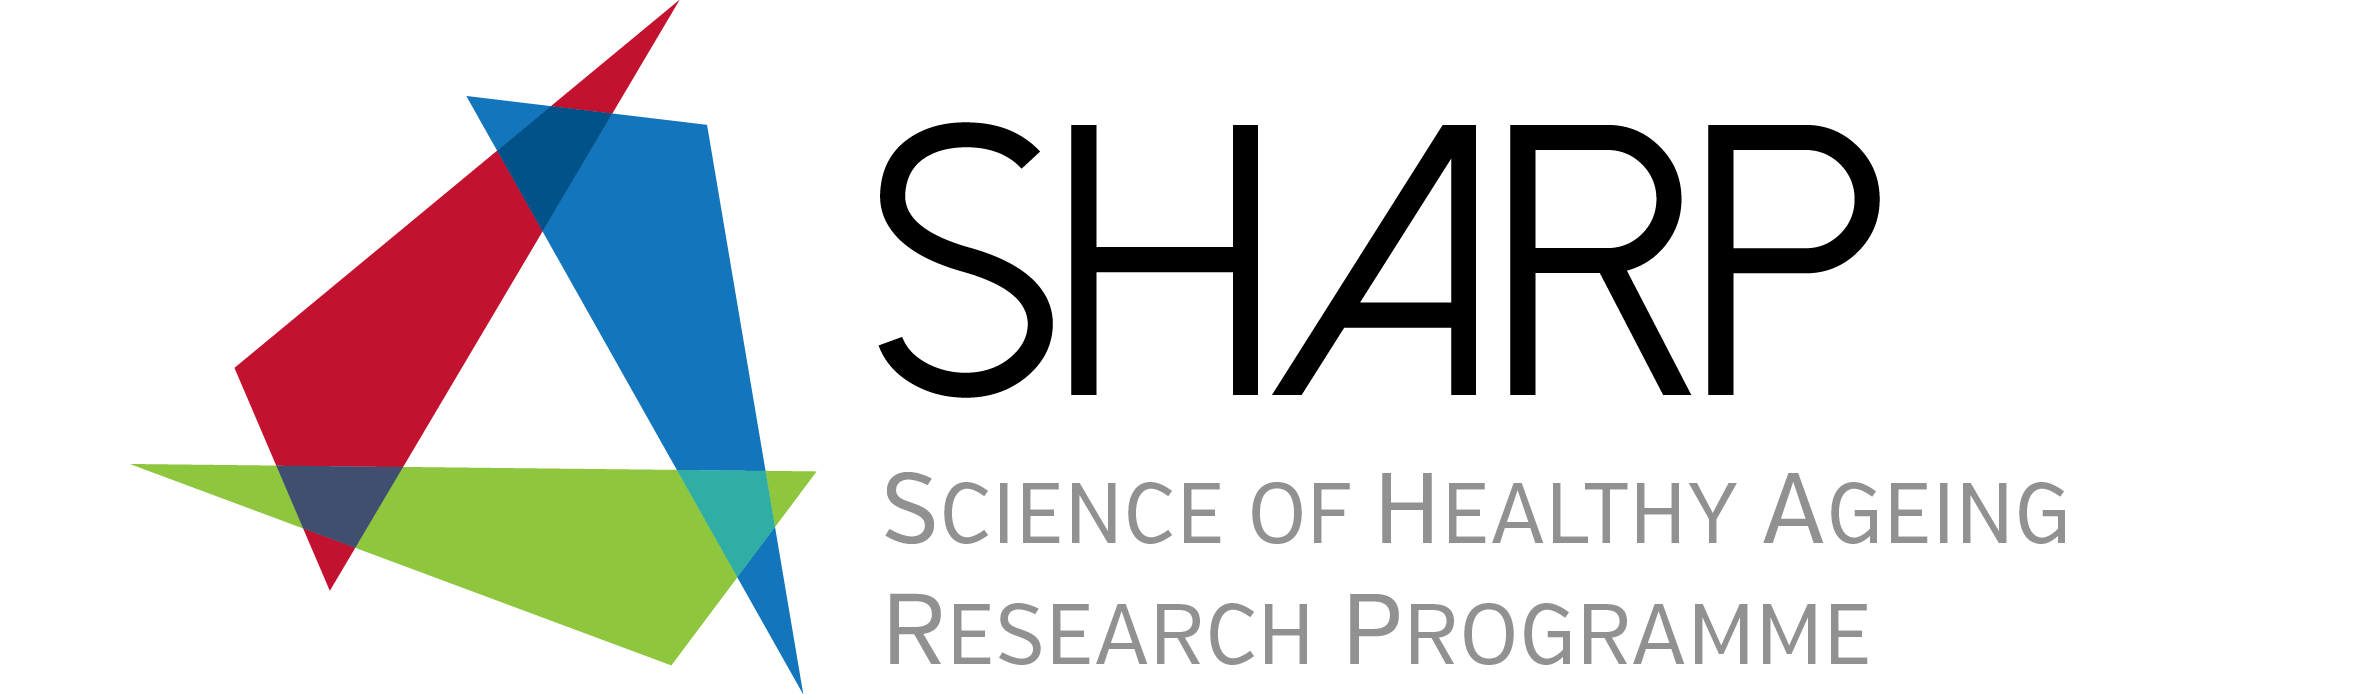 Icon Science of Healthy Ageing Research Programme (SHARP)